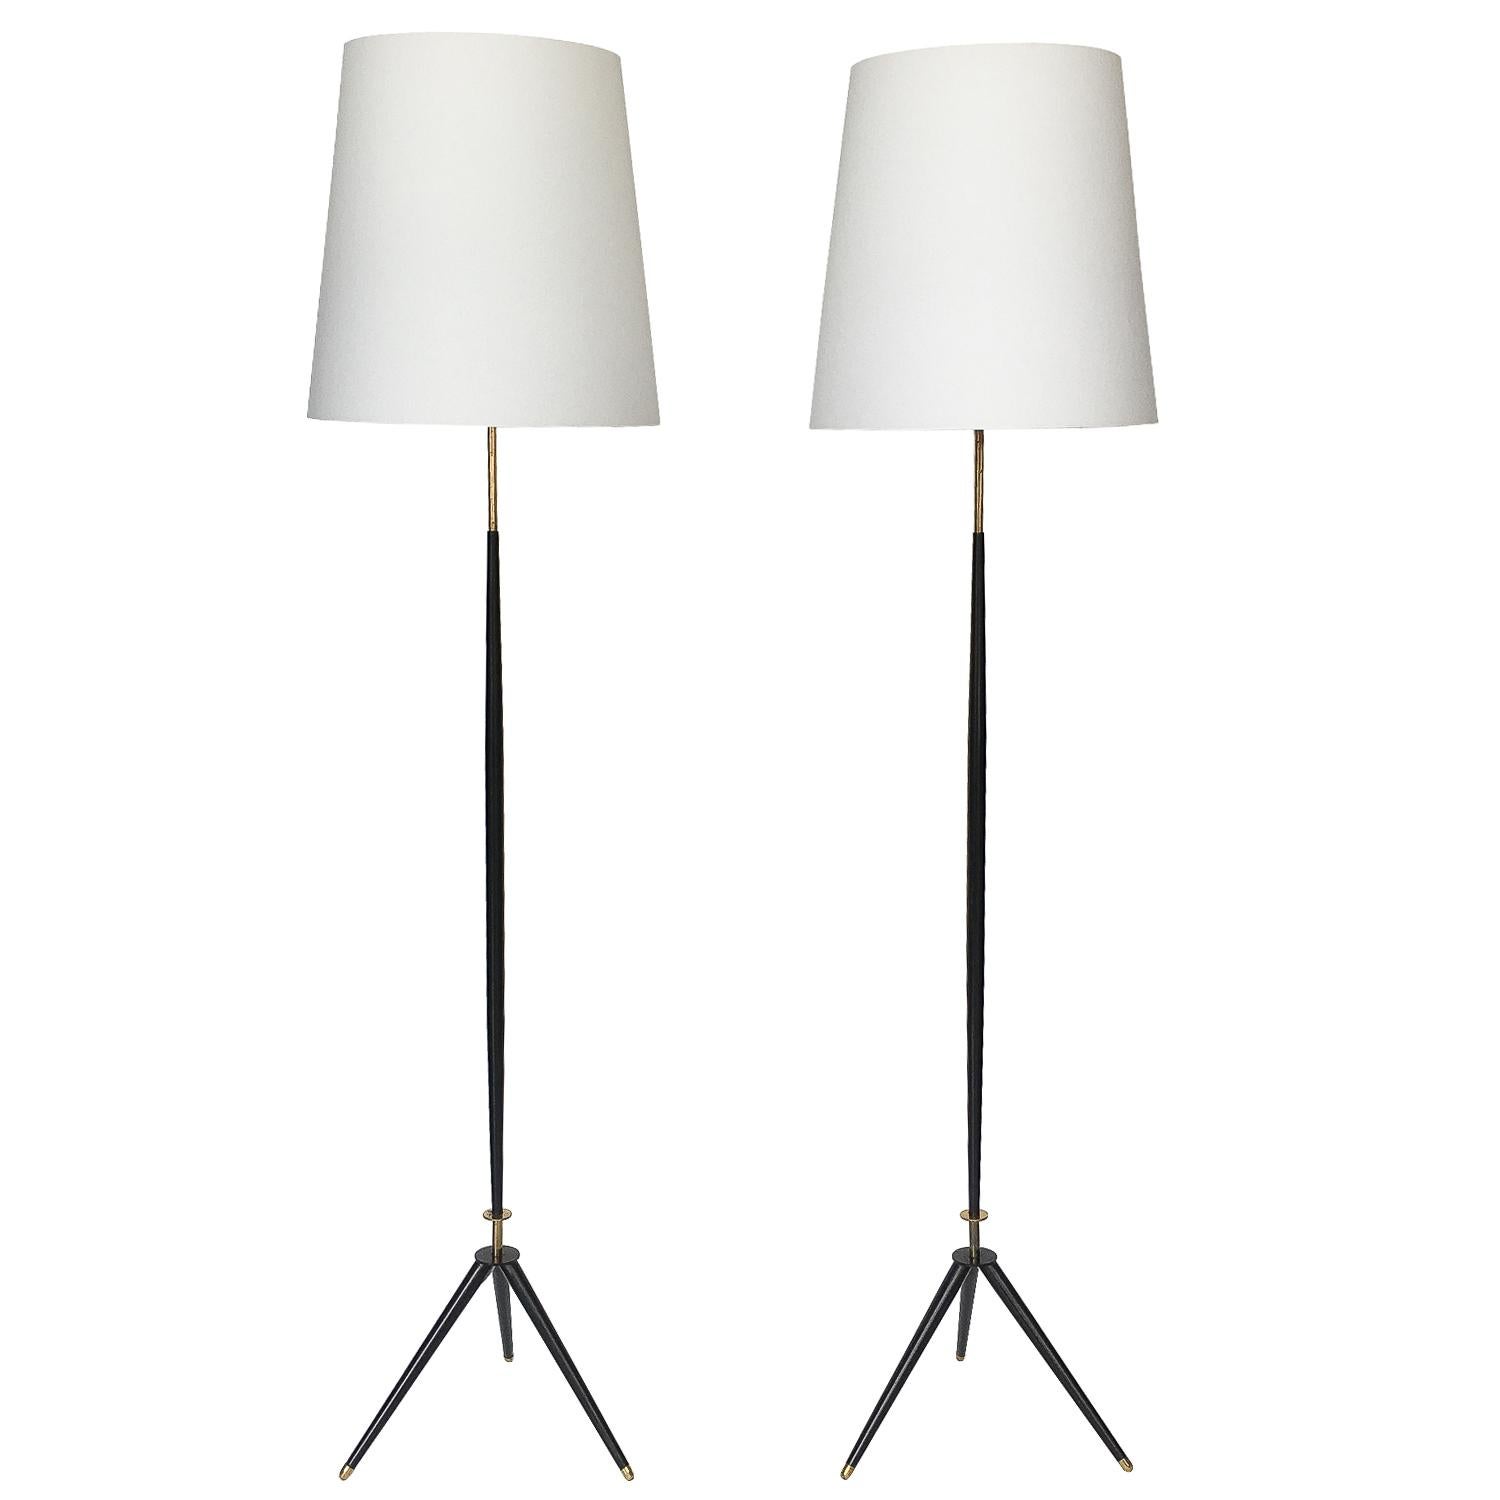 Pair of elegant floor lamps by Svend Aage Holm Sorensen. Manufactured by Holm Sorensen & Co. Denmark, circa 1950s. Striking tripod legs that feel almost Italian rather than Scandinavian! These lamps feature black enameled steel supports and tripod